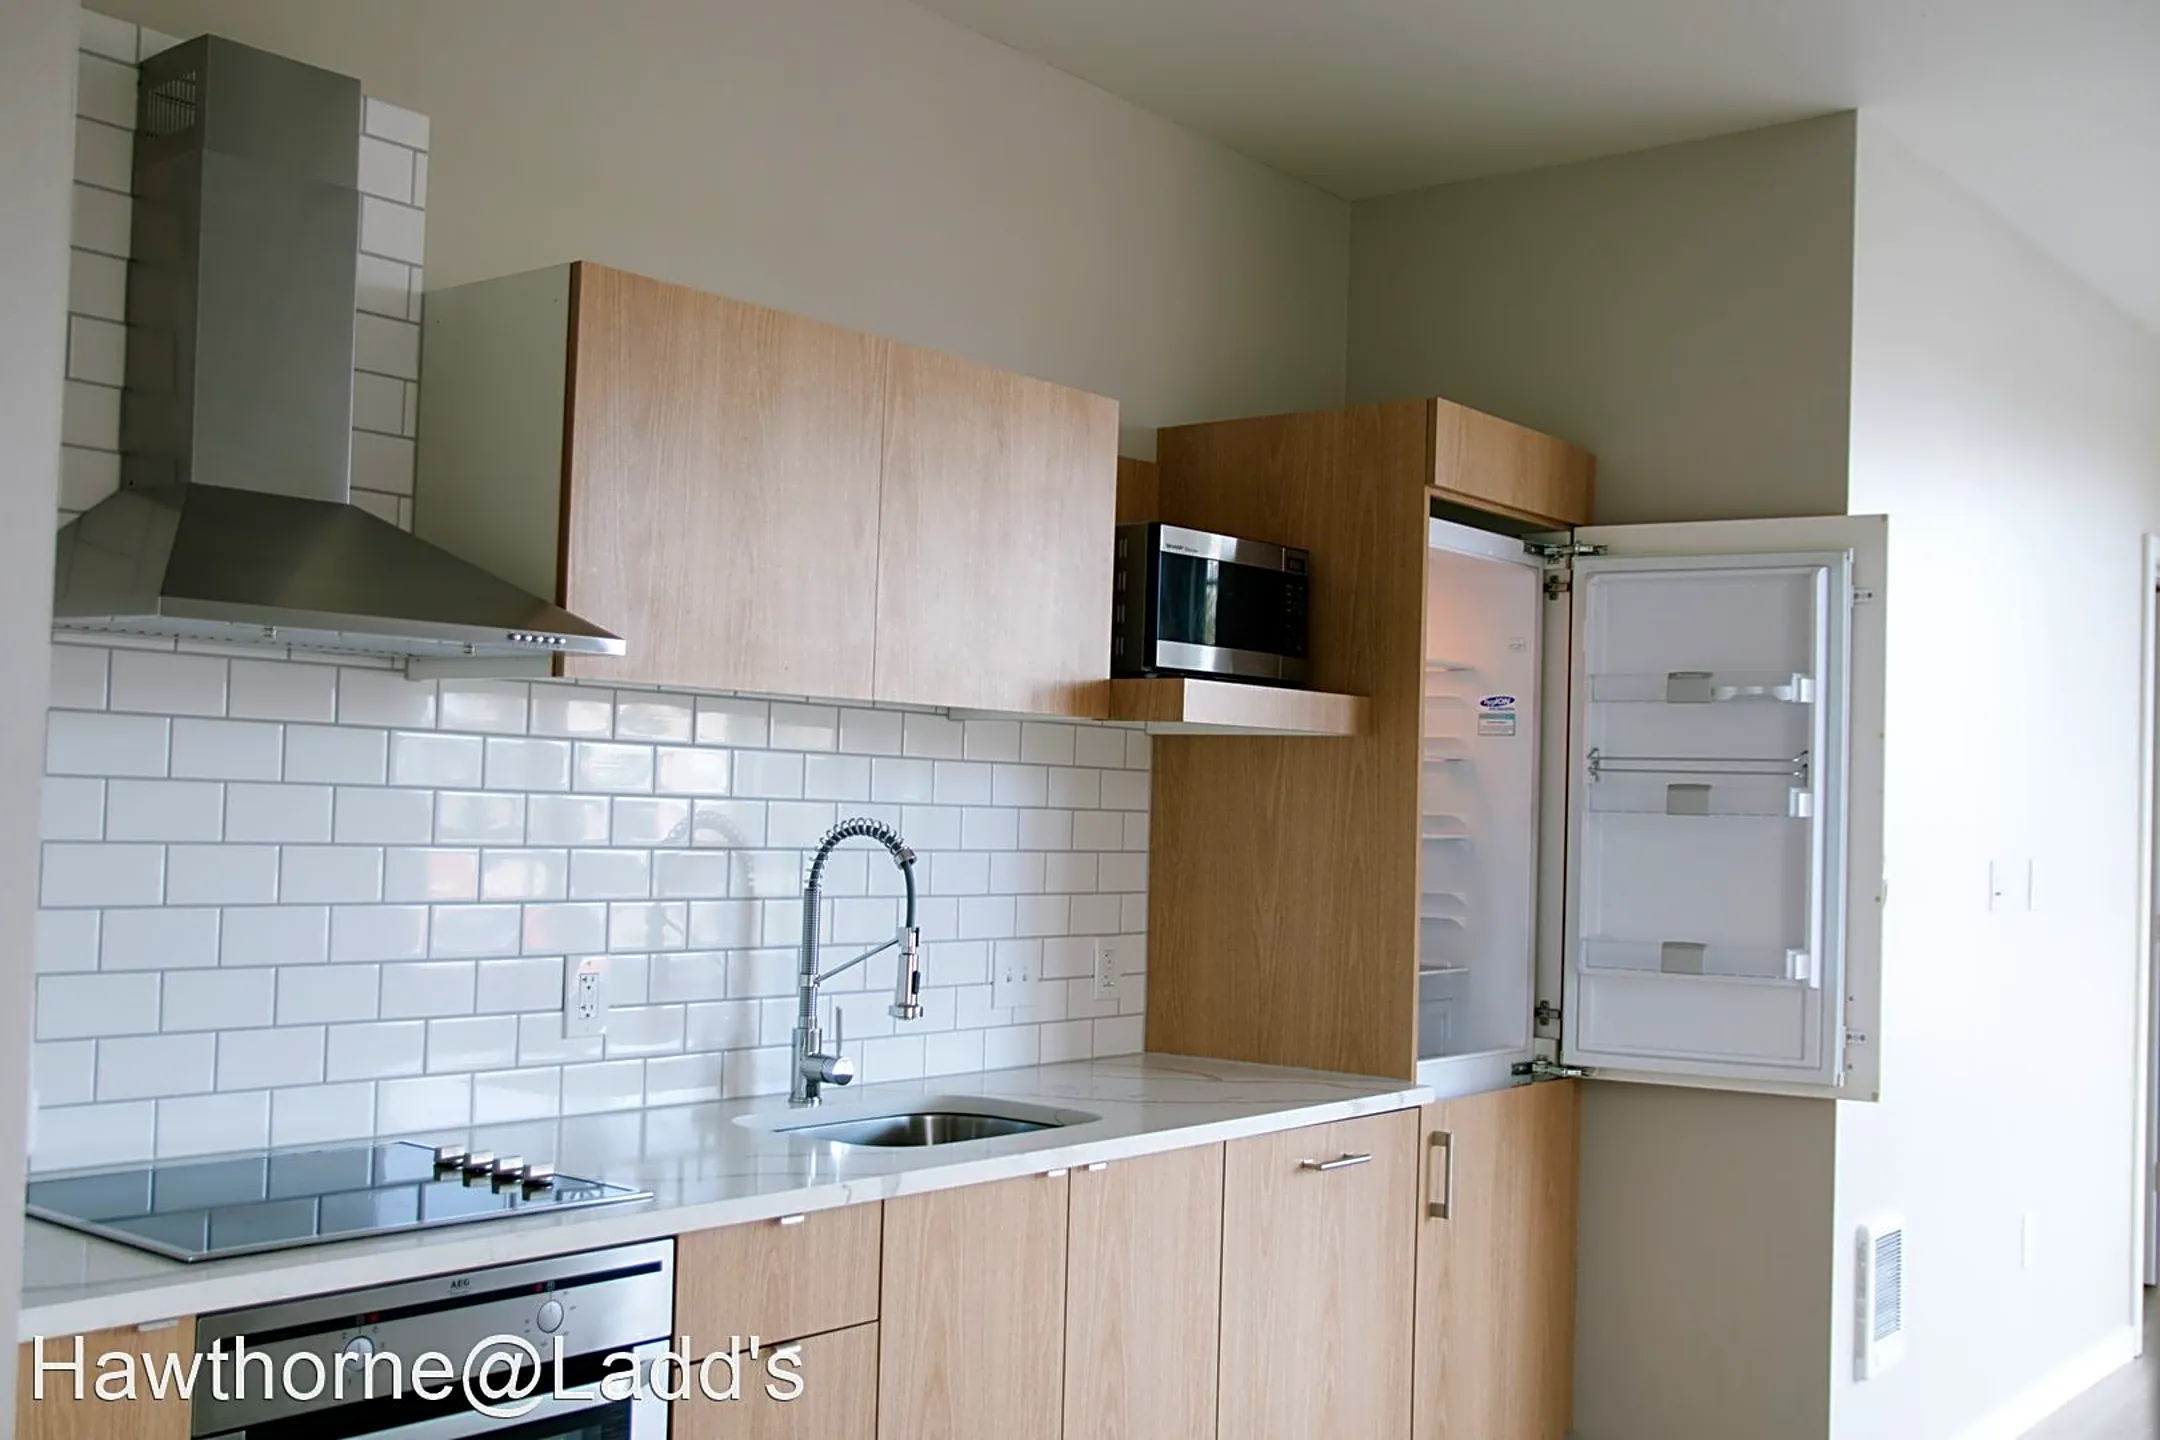 Kitchen - Hawthorne @ Ladd's - 1 & 2 Bedroom Apartment Homes - Portland, OR